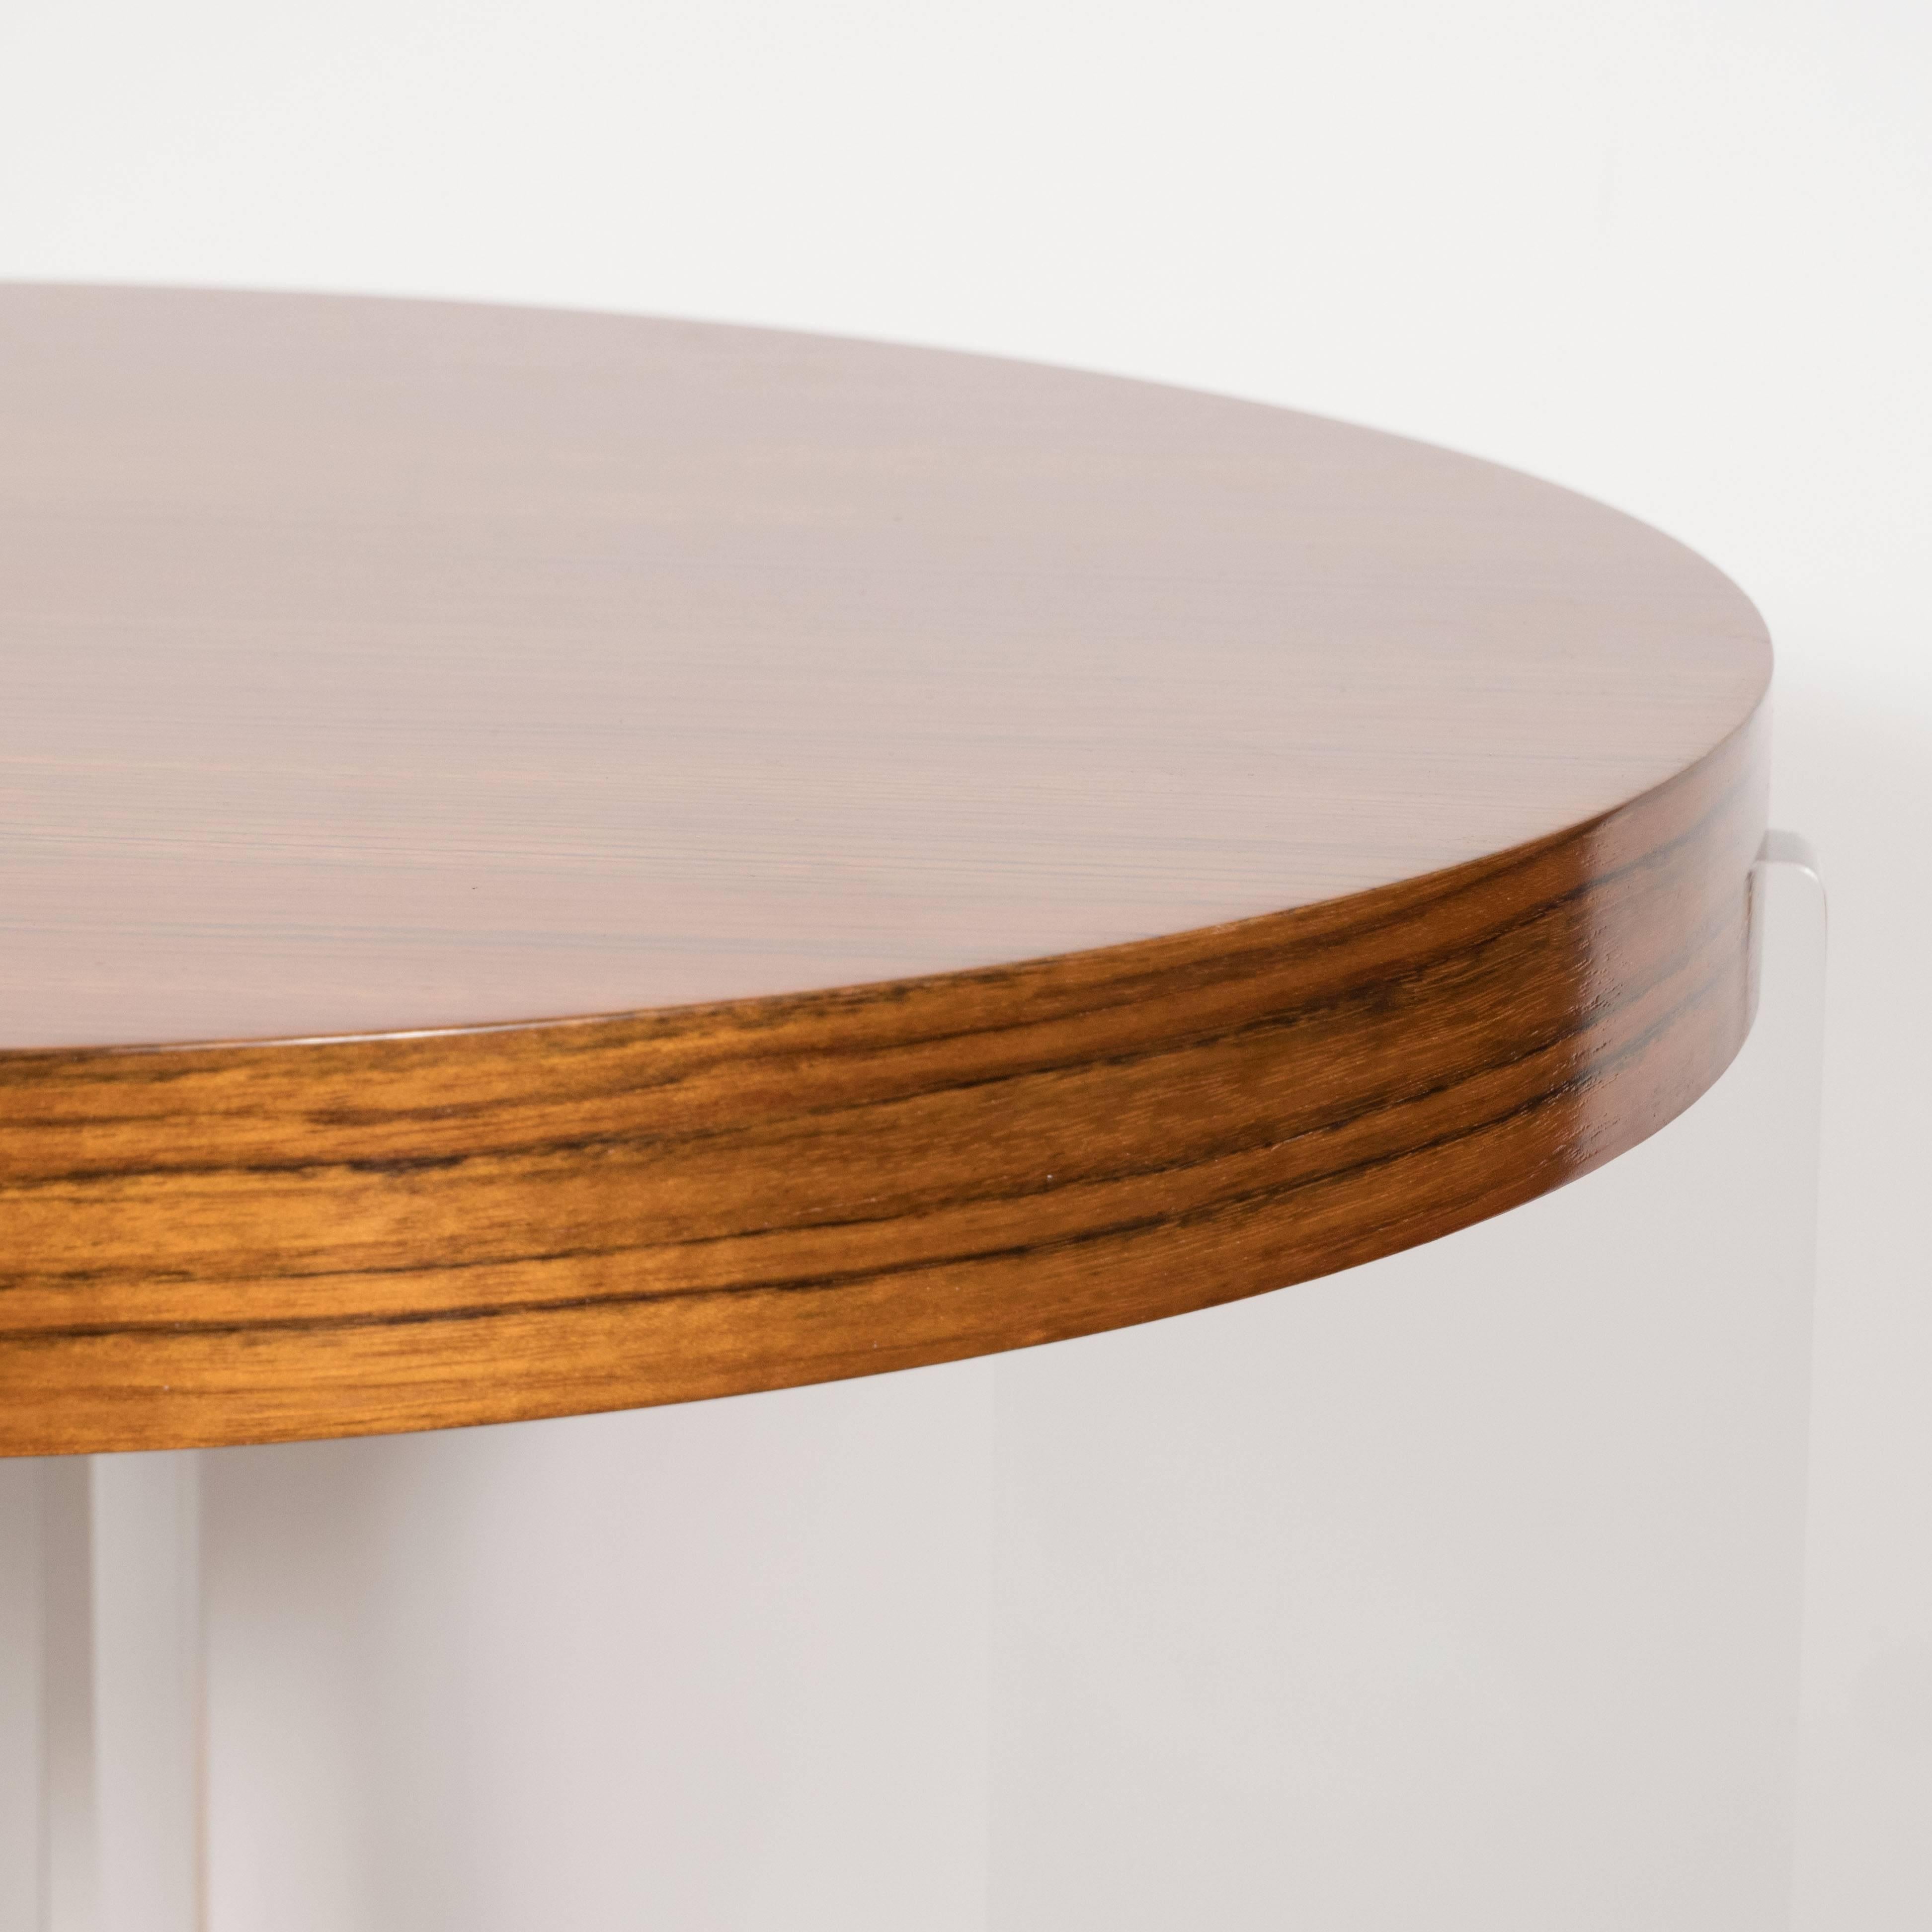 Vanguard Circular Table in Bookmatched Mozambique with Lucite Supports 1